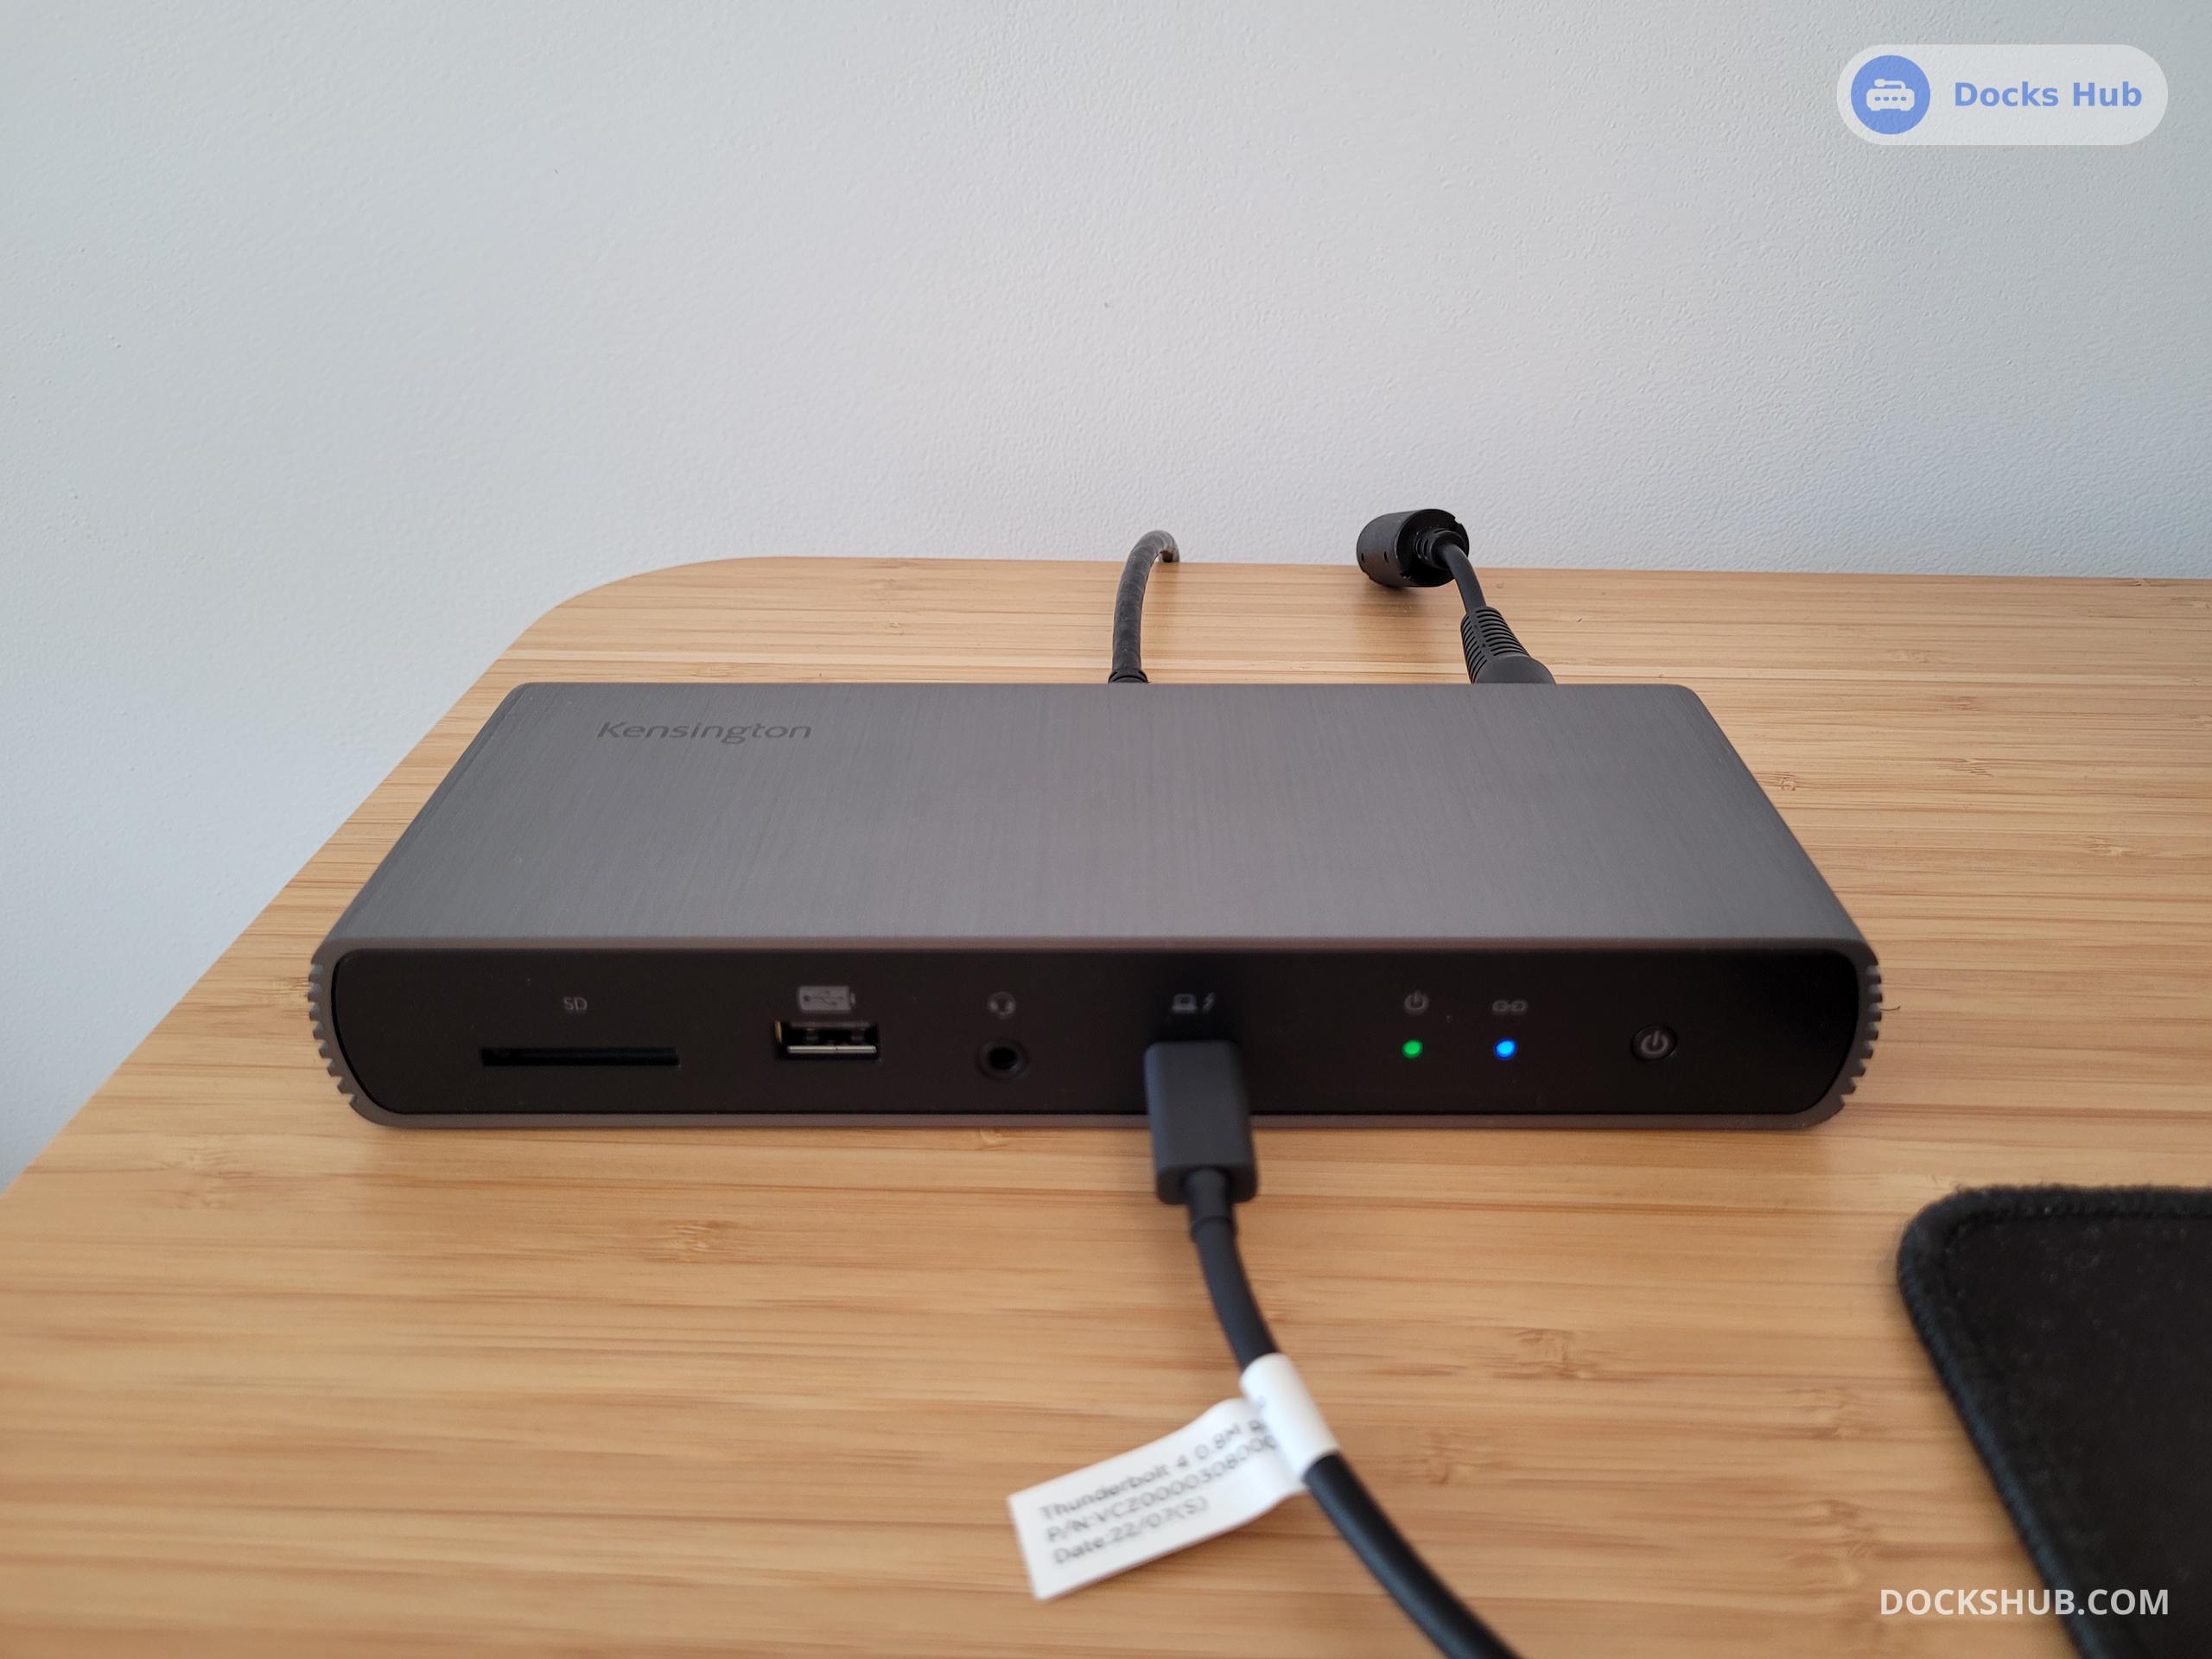 Dell Launches a Thunderbolt 4 Dock with an Upgradeable Module